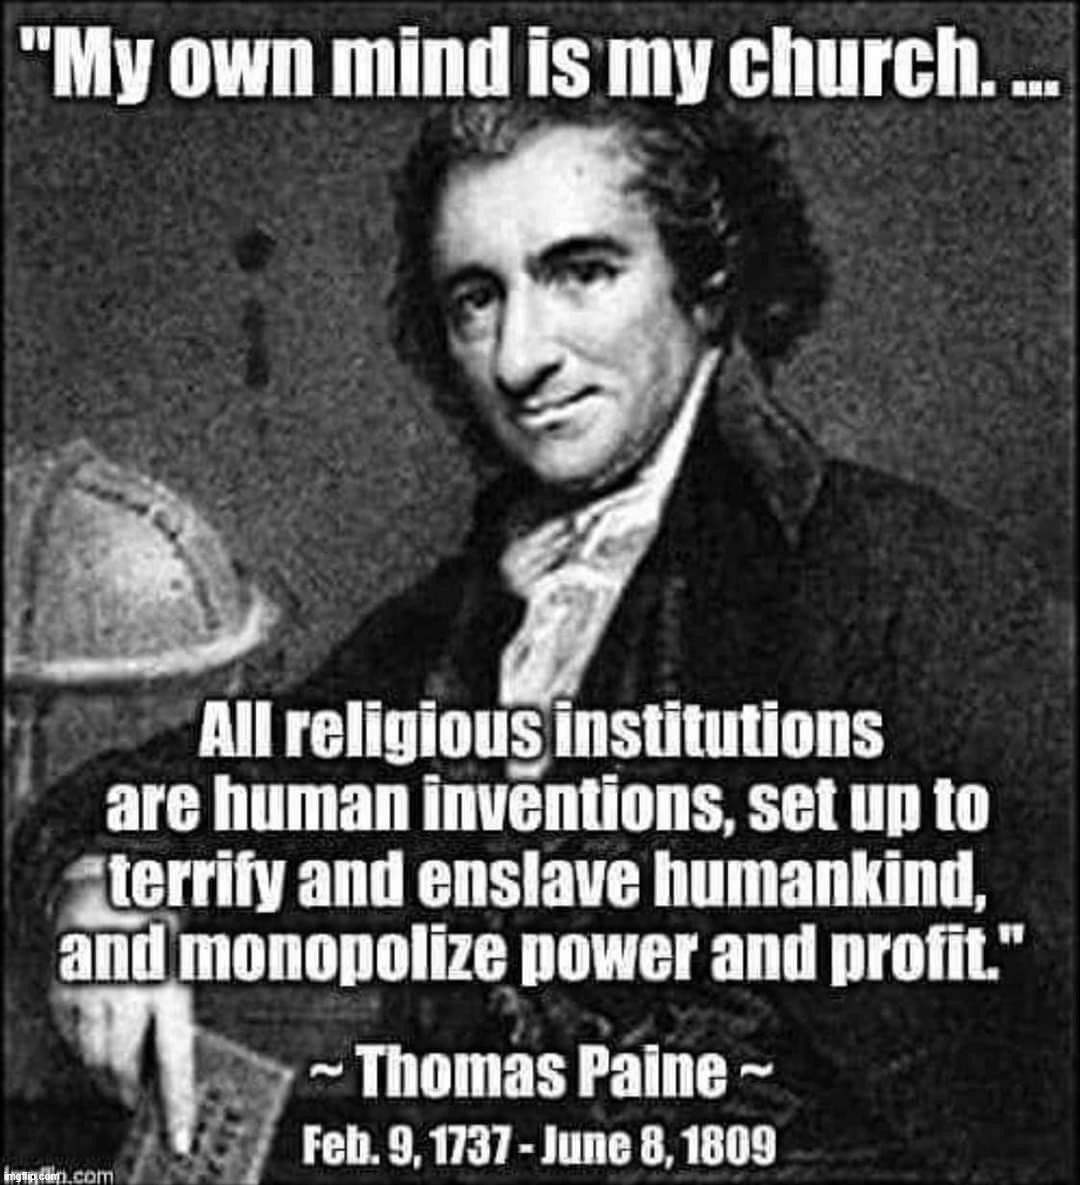 Thomas Paine quote | image tagged in thomas paine quote | made w/ Imgflip meme maker